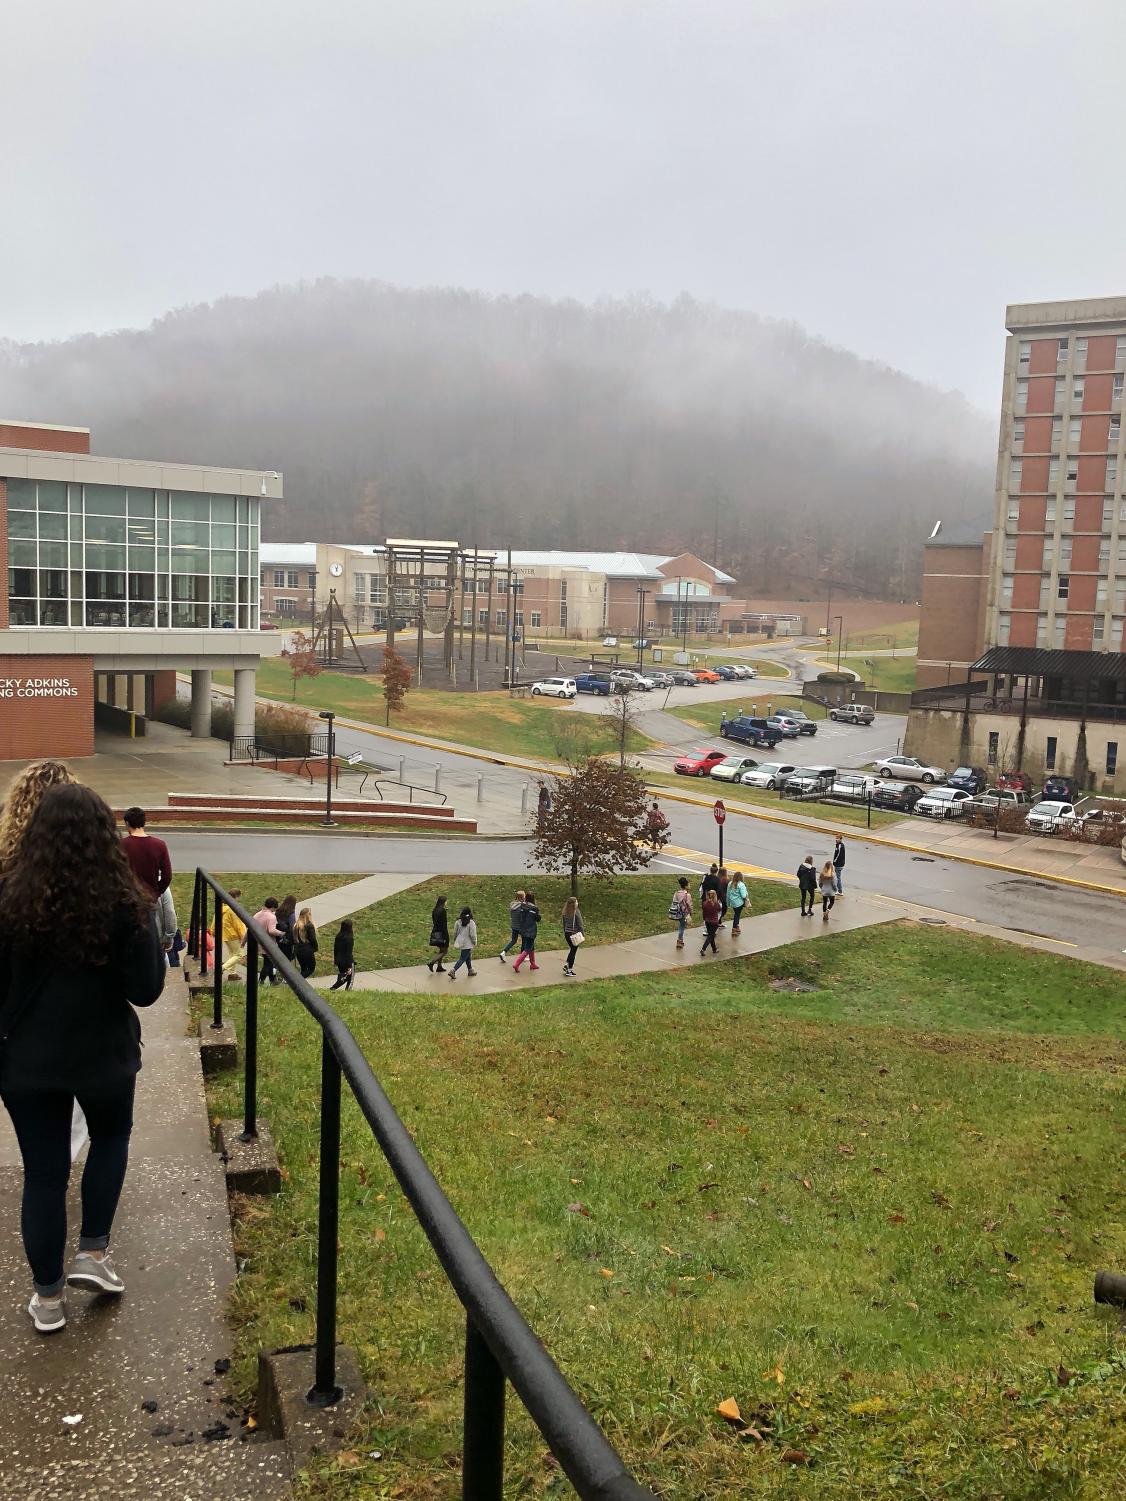 A+Dreary+Day+for+Discovery+at+Morehead+State